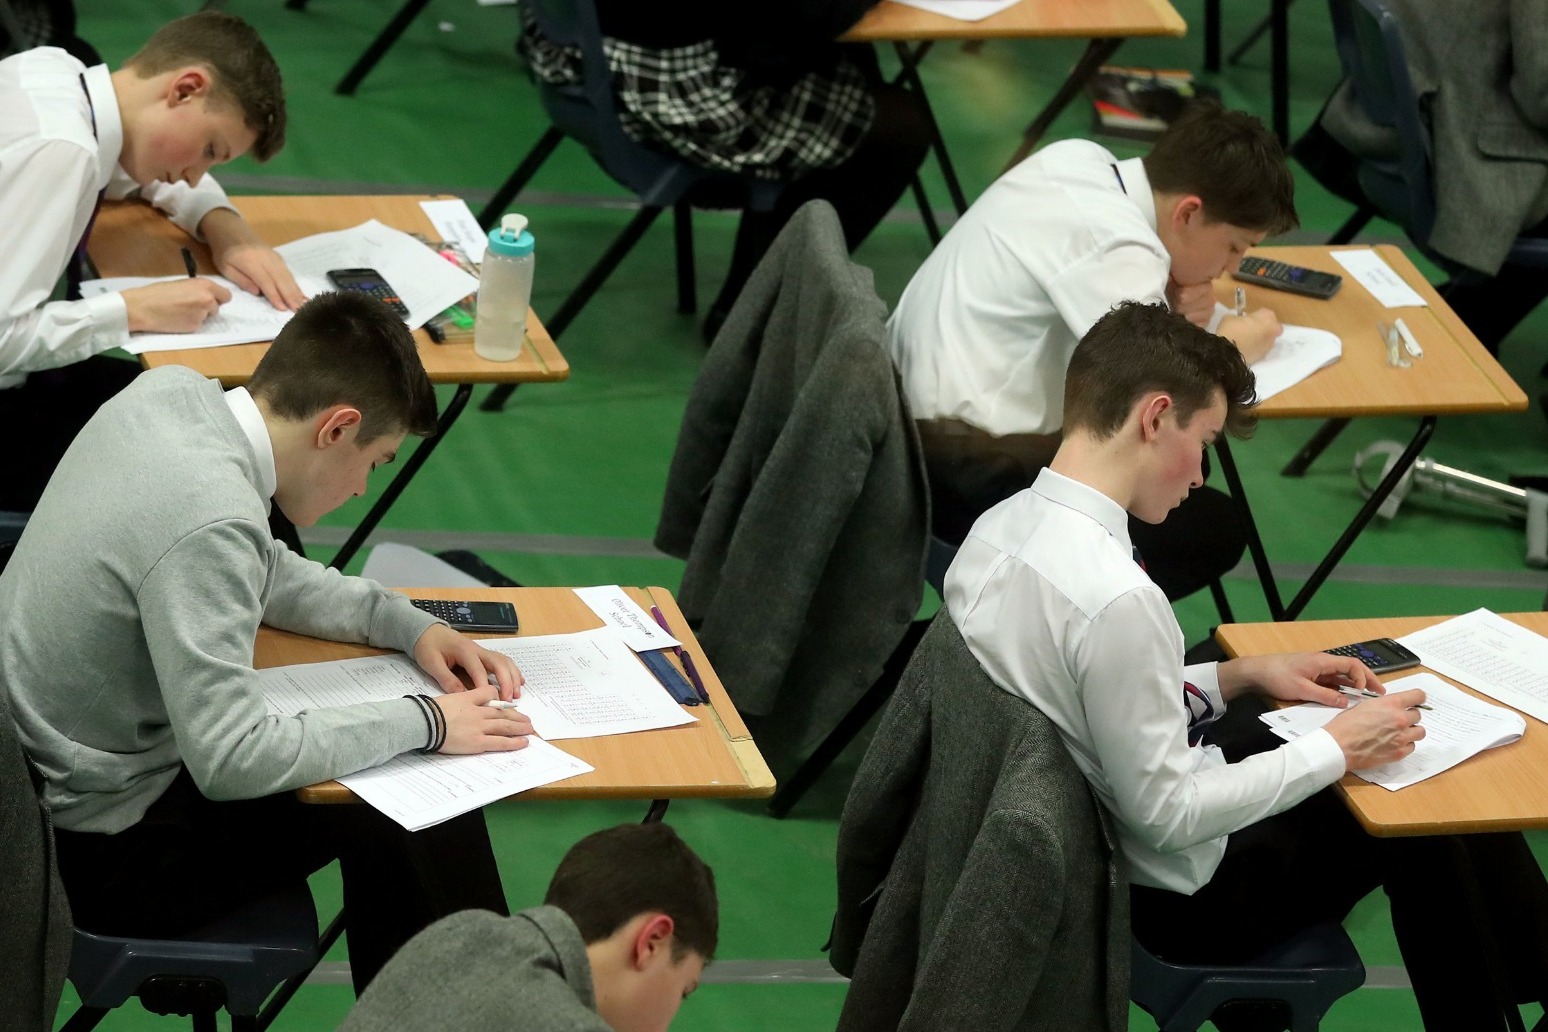 More than 100000 pupils due to receive exam results across Scotland